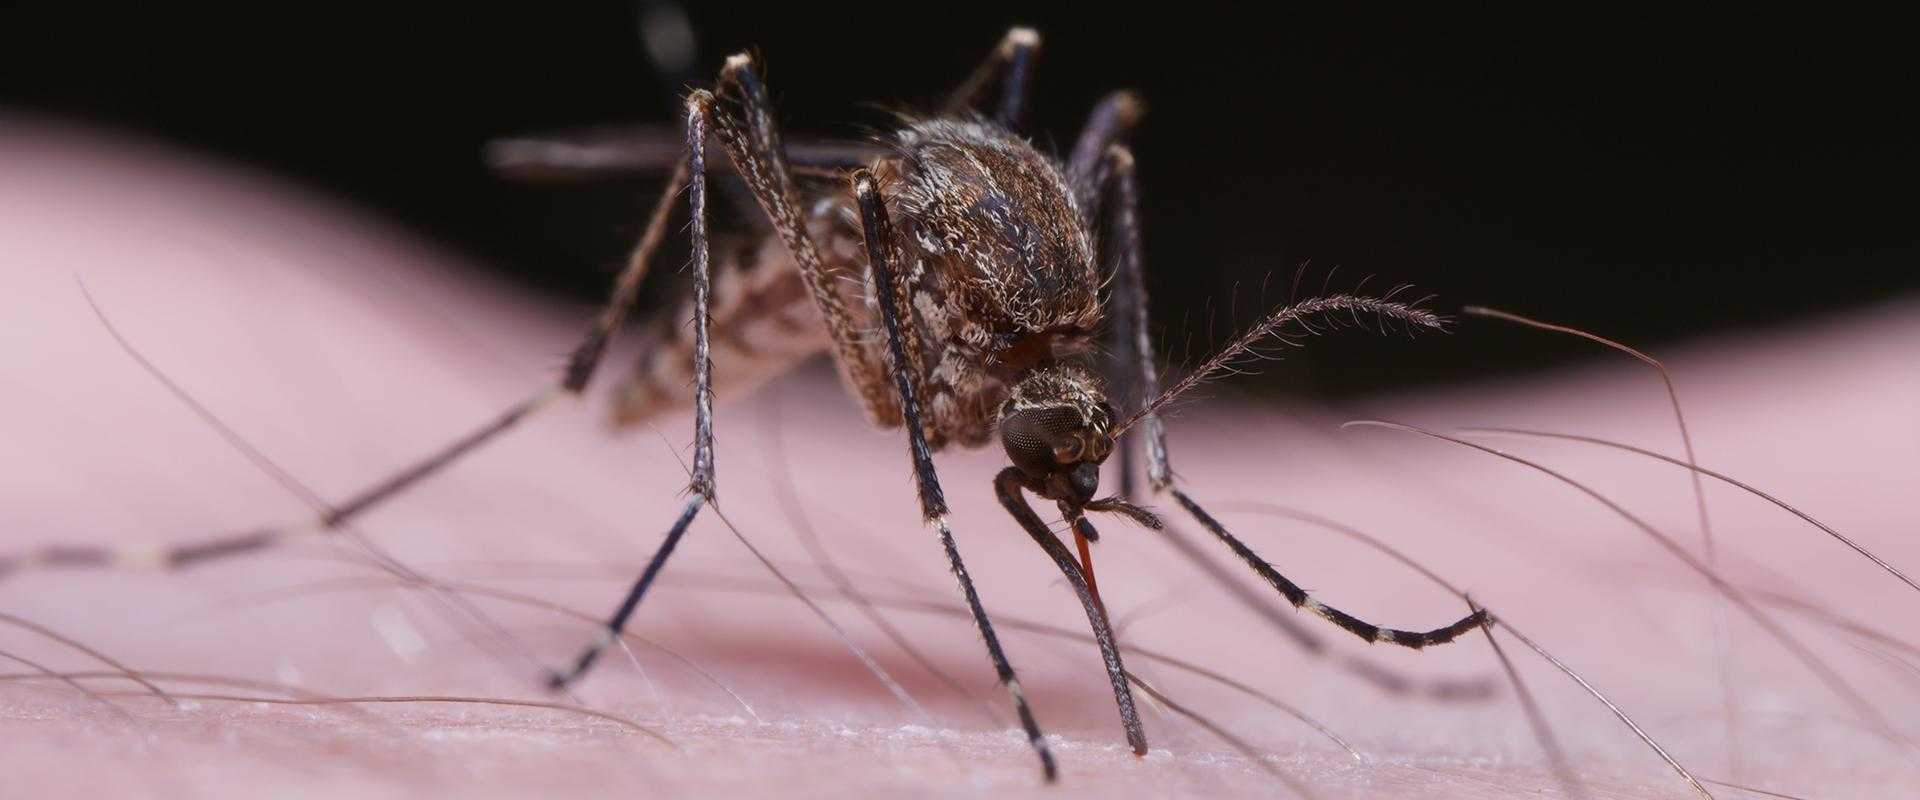 mosquito on skin in south florida